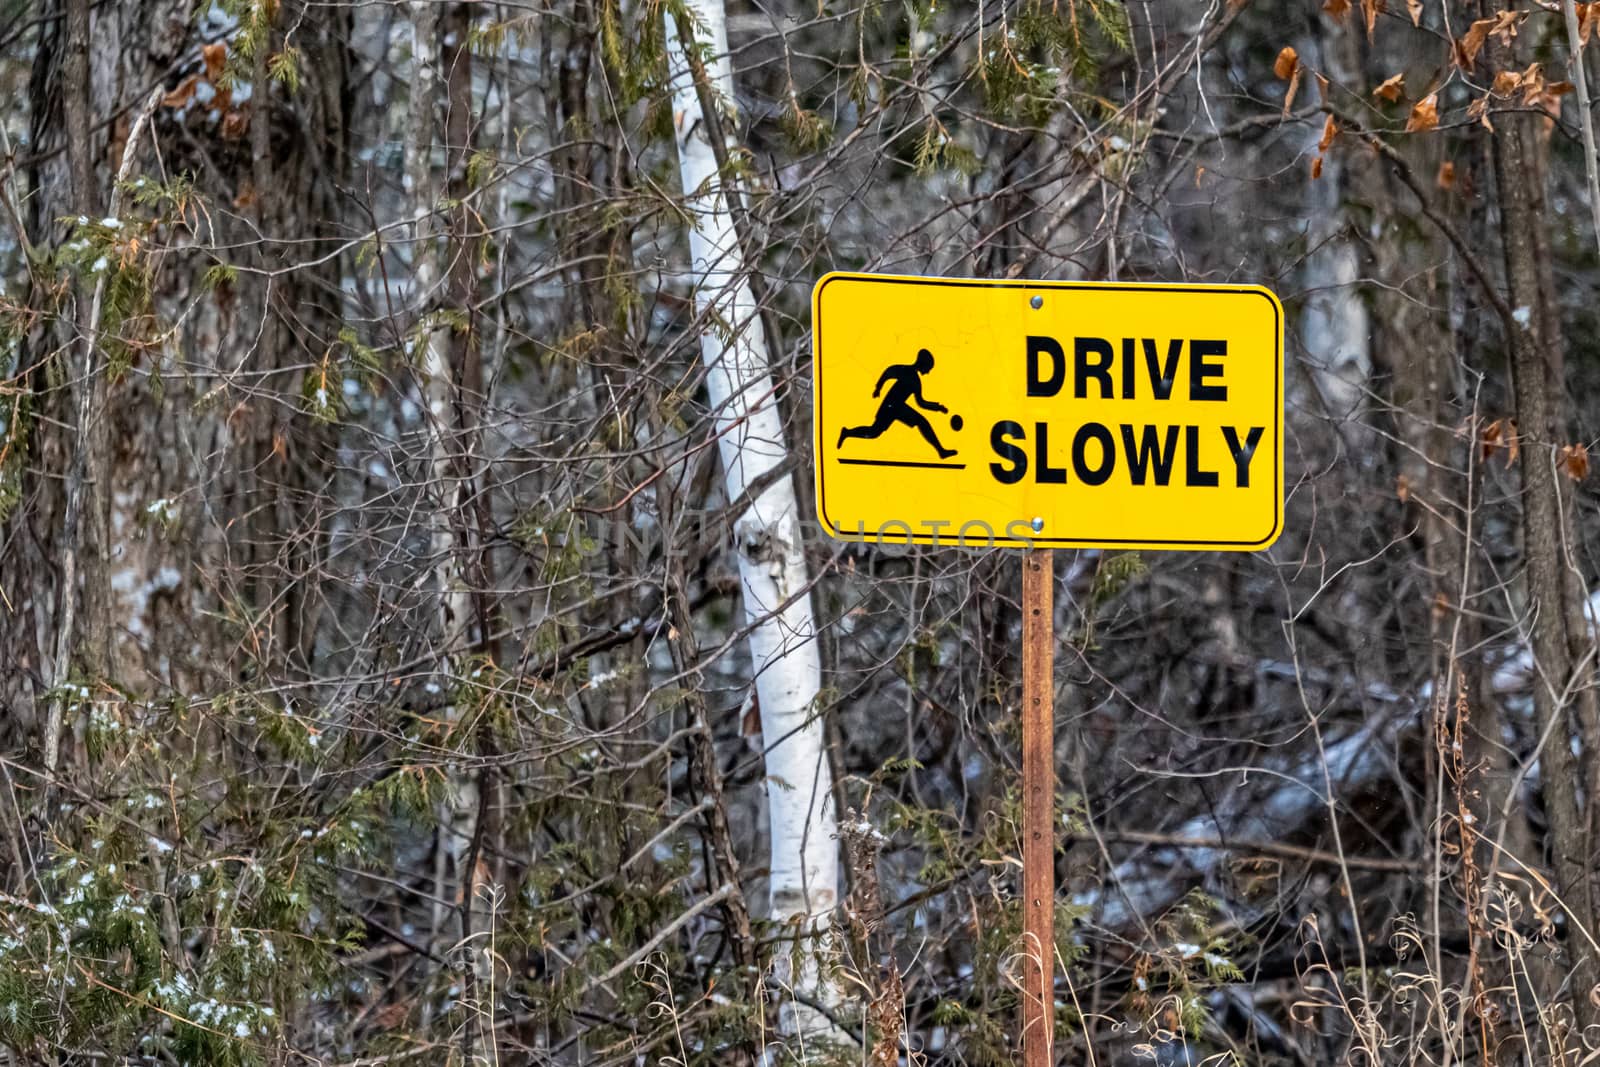 Cottage Country Road Sign Warns "Drive Slowly" by colintemple